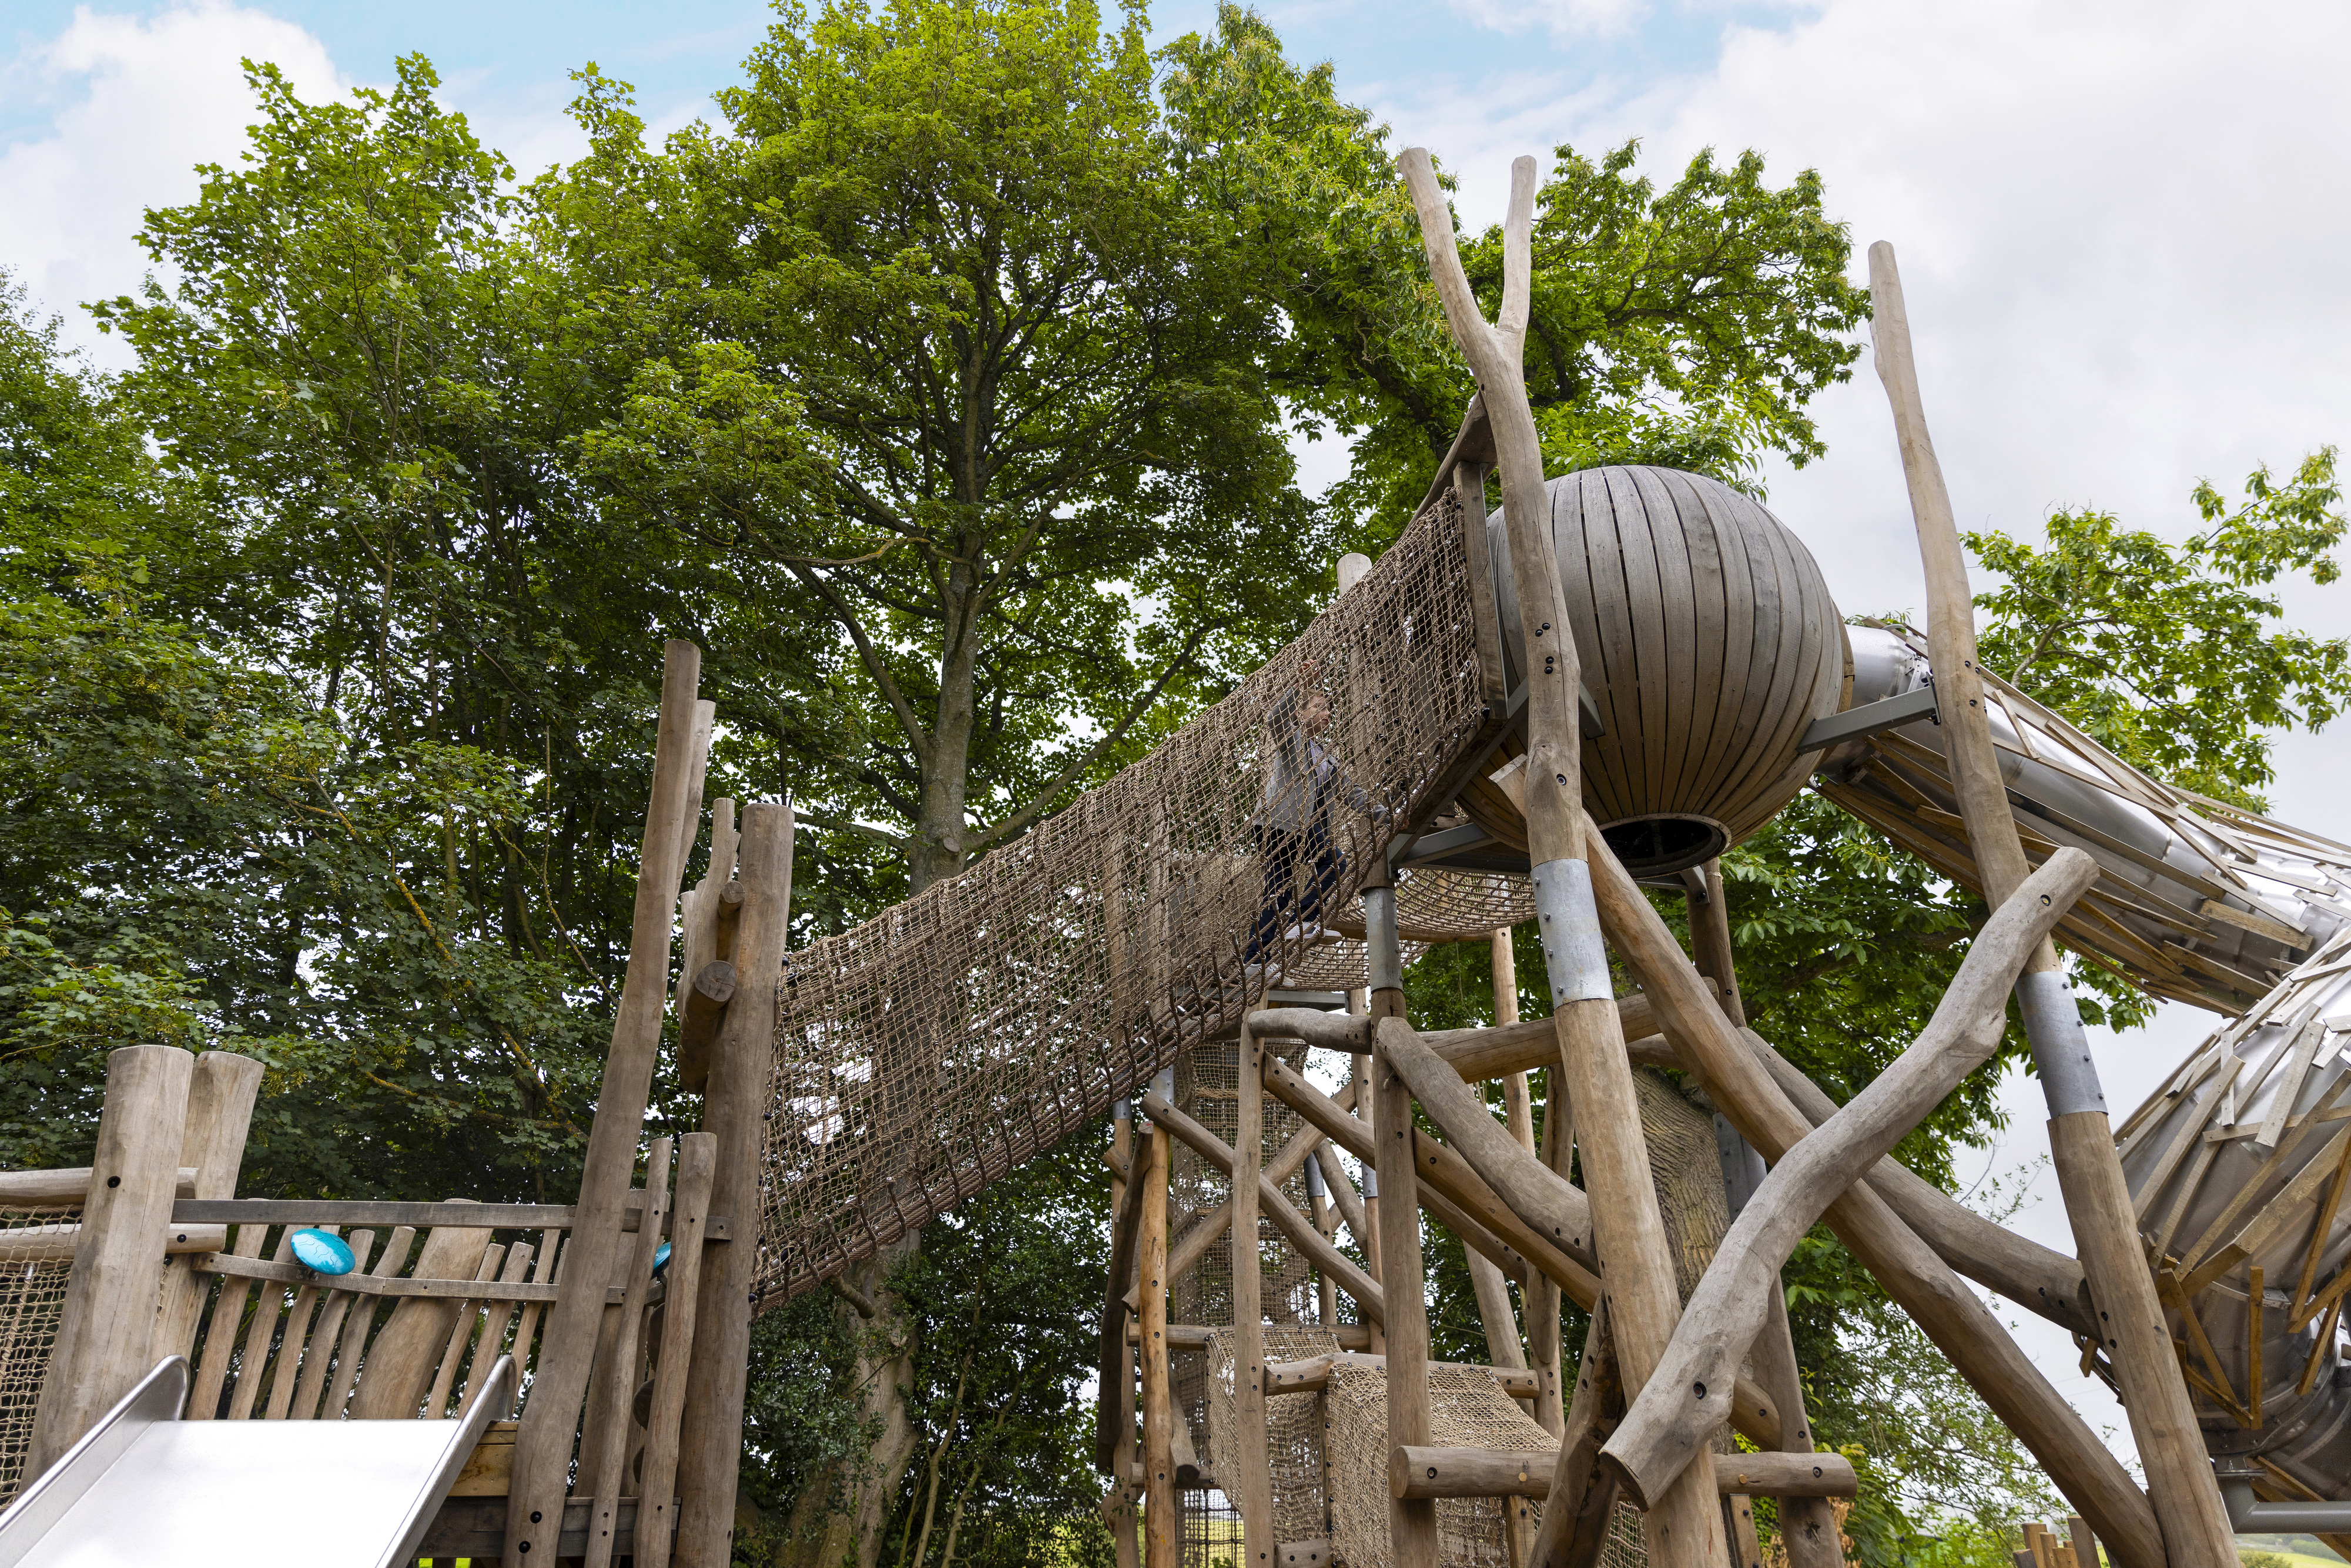 The play area at Belsay featuring lots of wooden play equipment and walkways in a woodland setting.